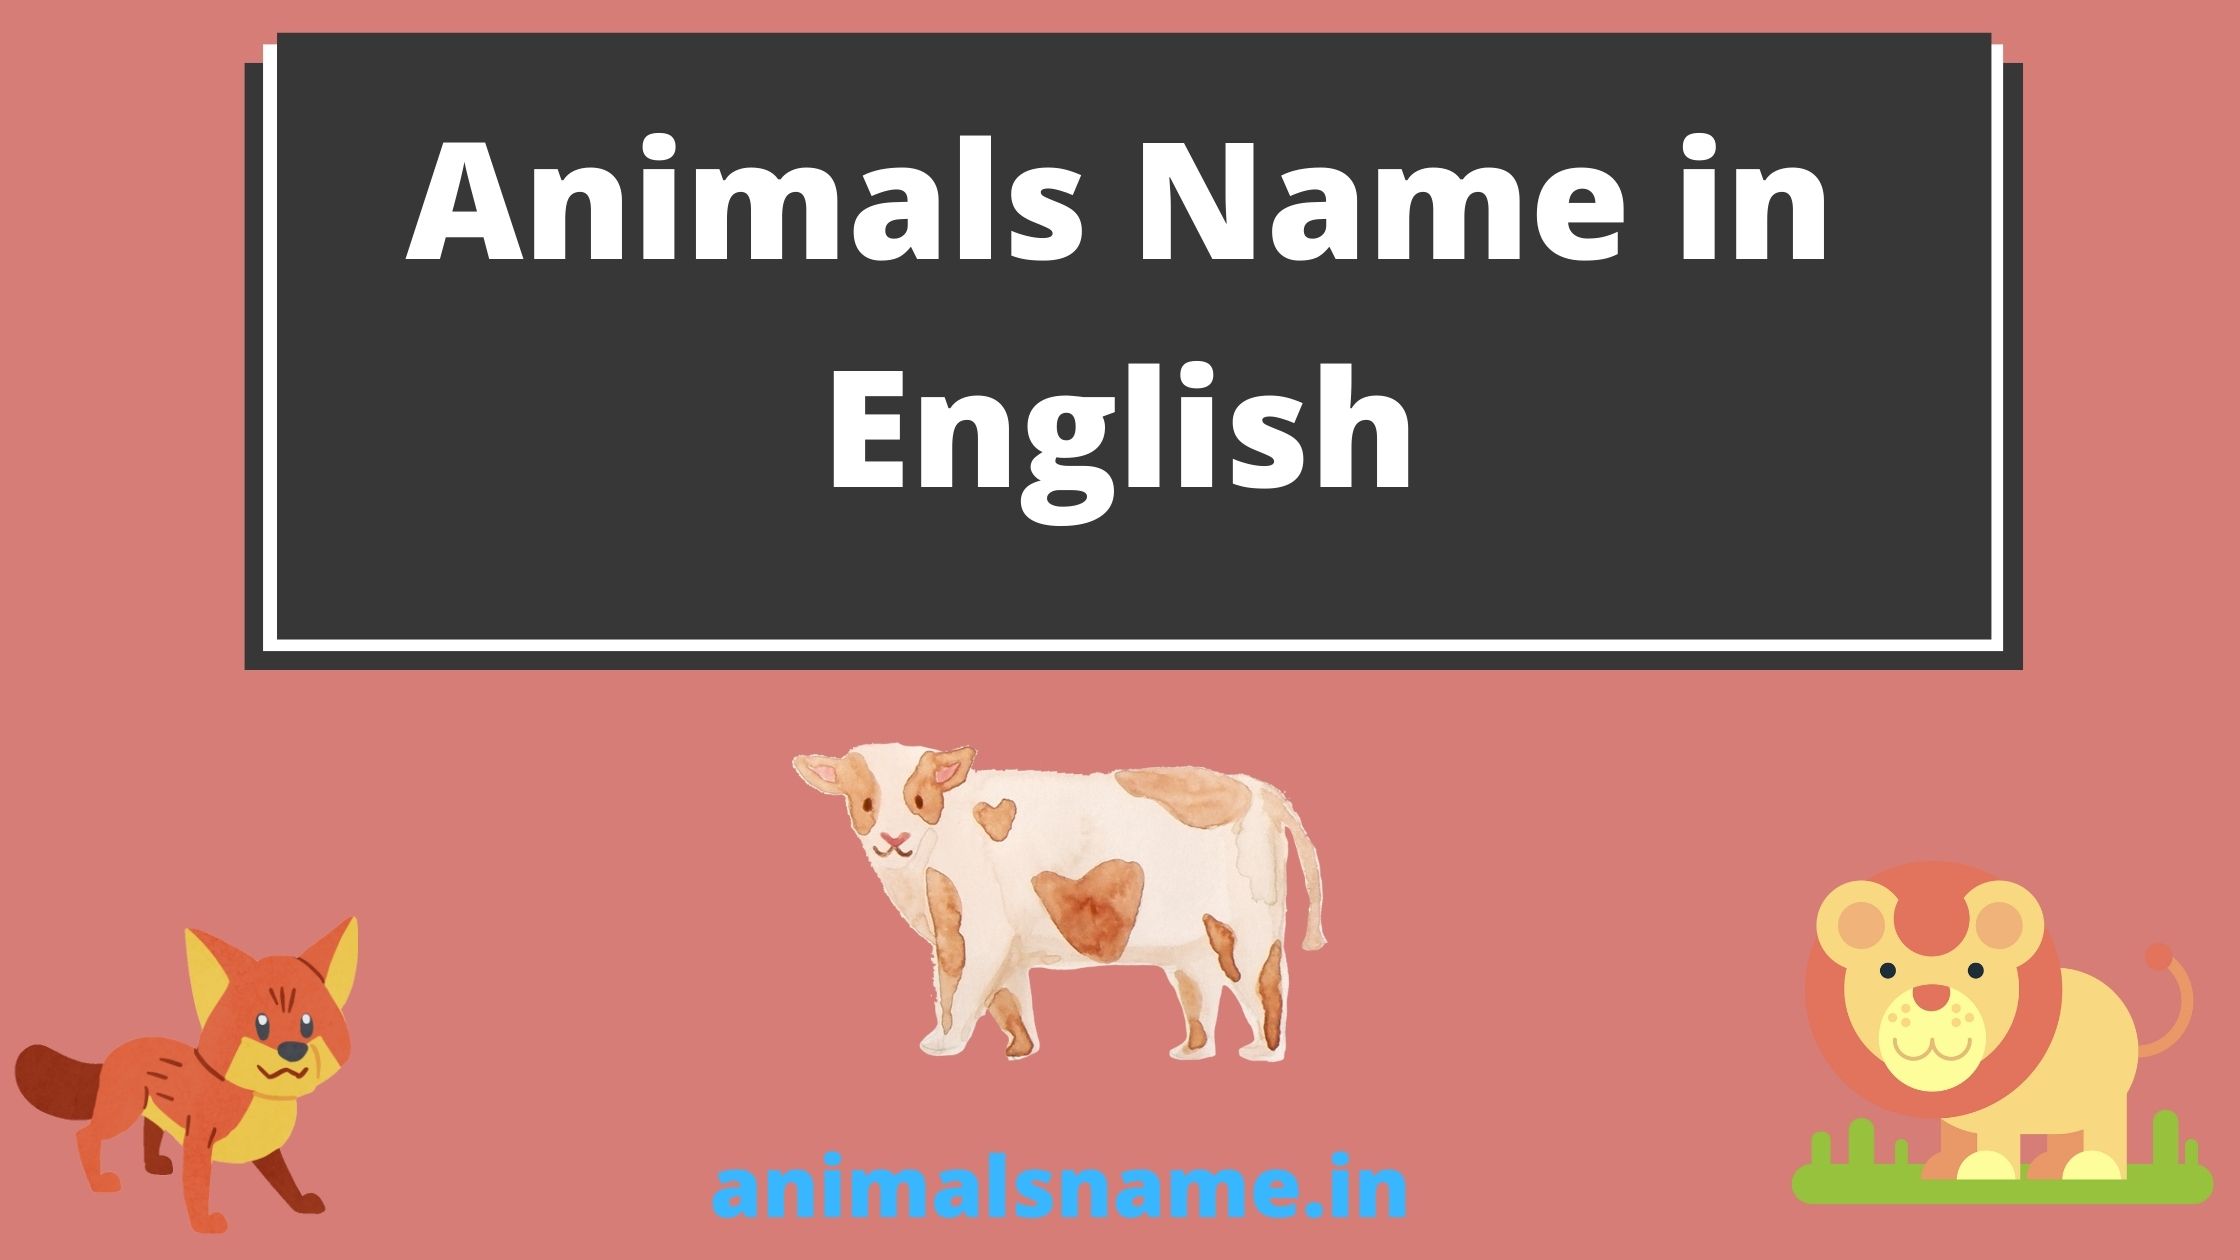 100+ Animals Name in English With Picture